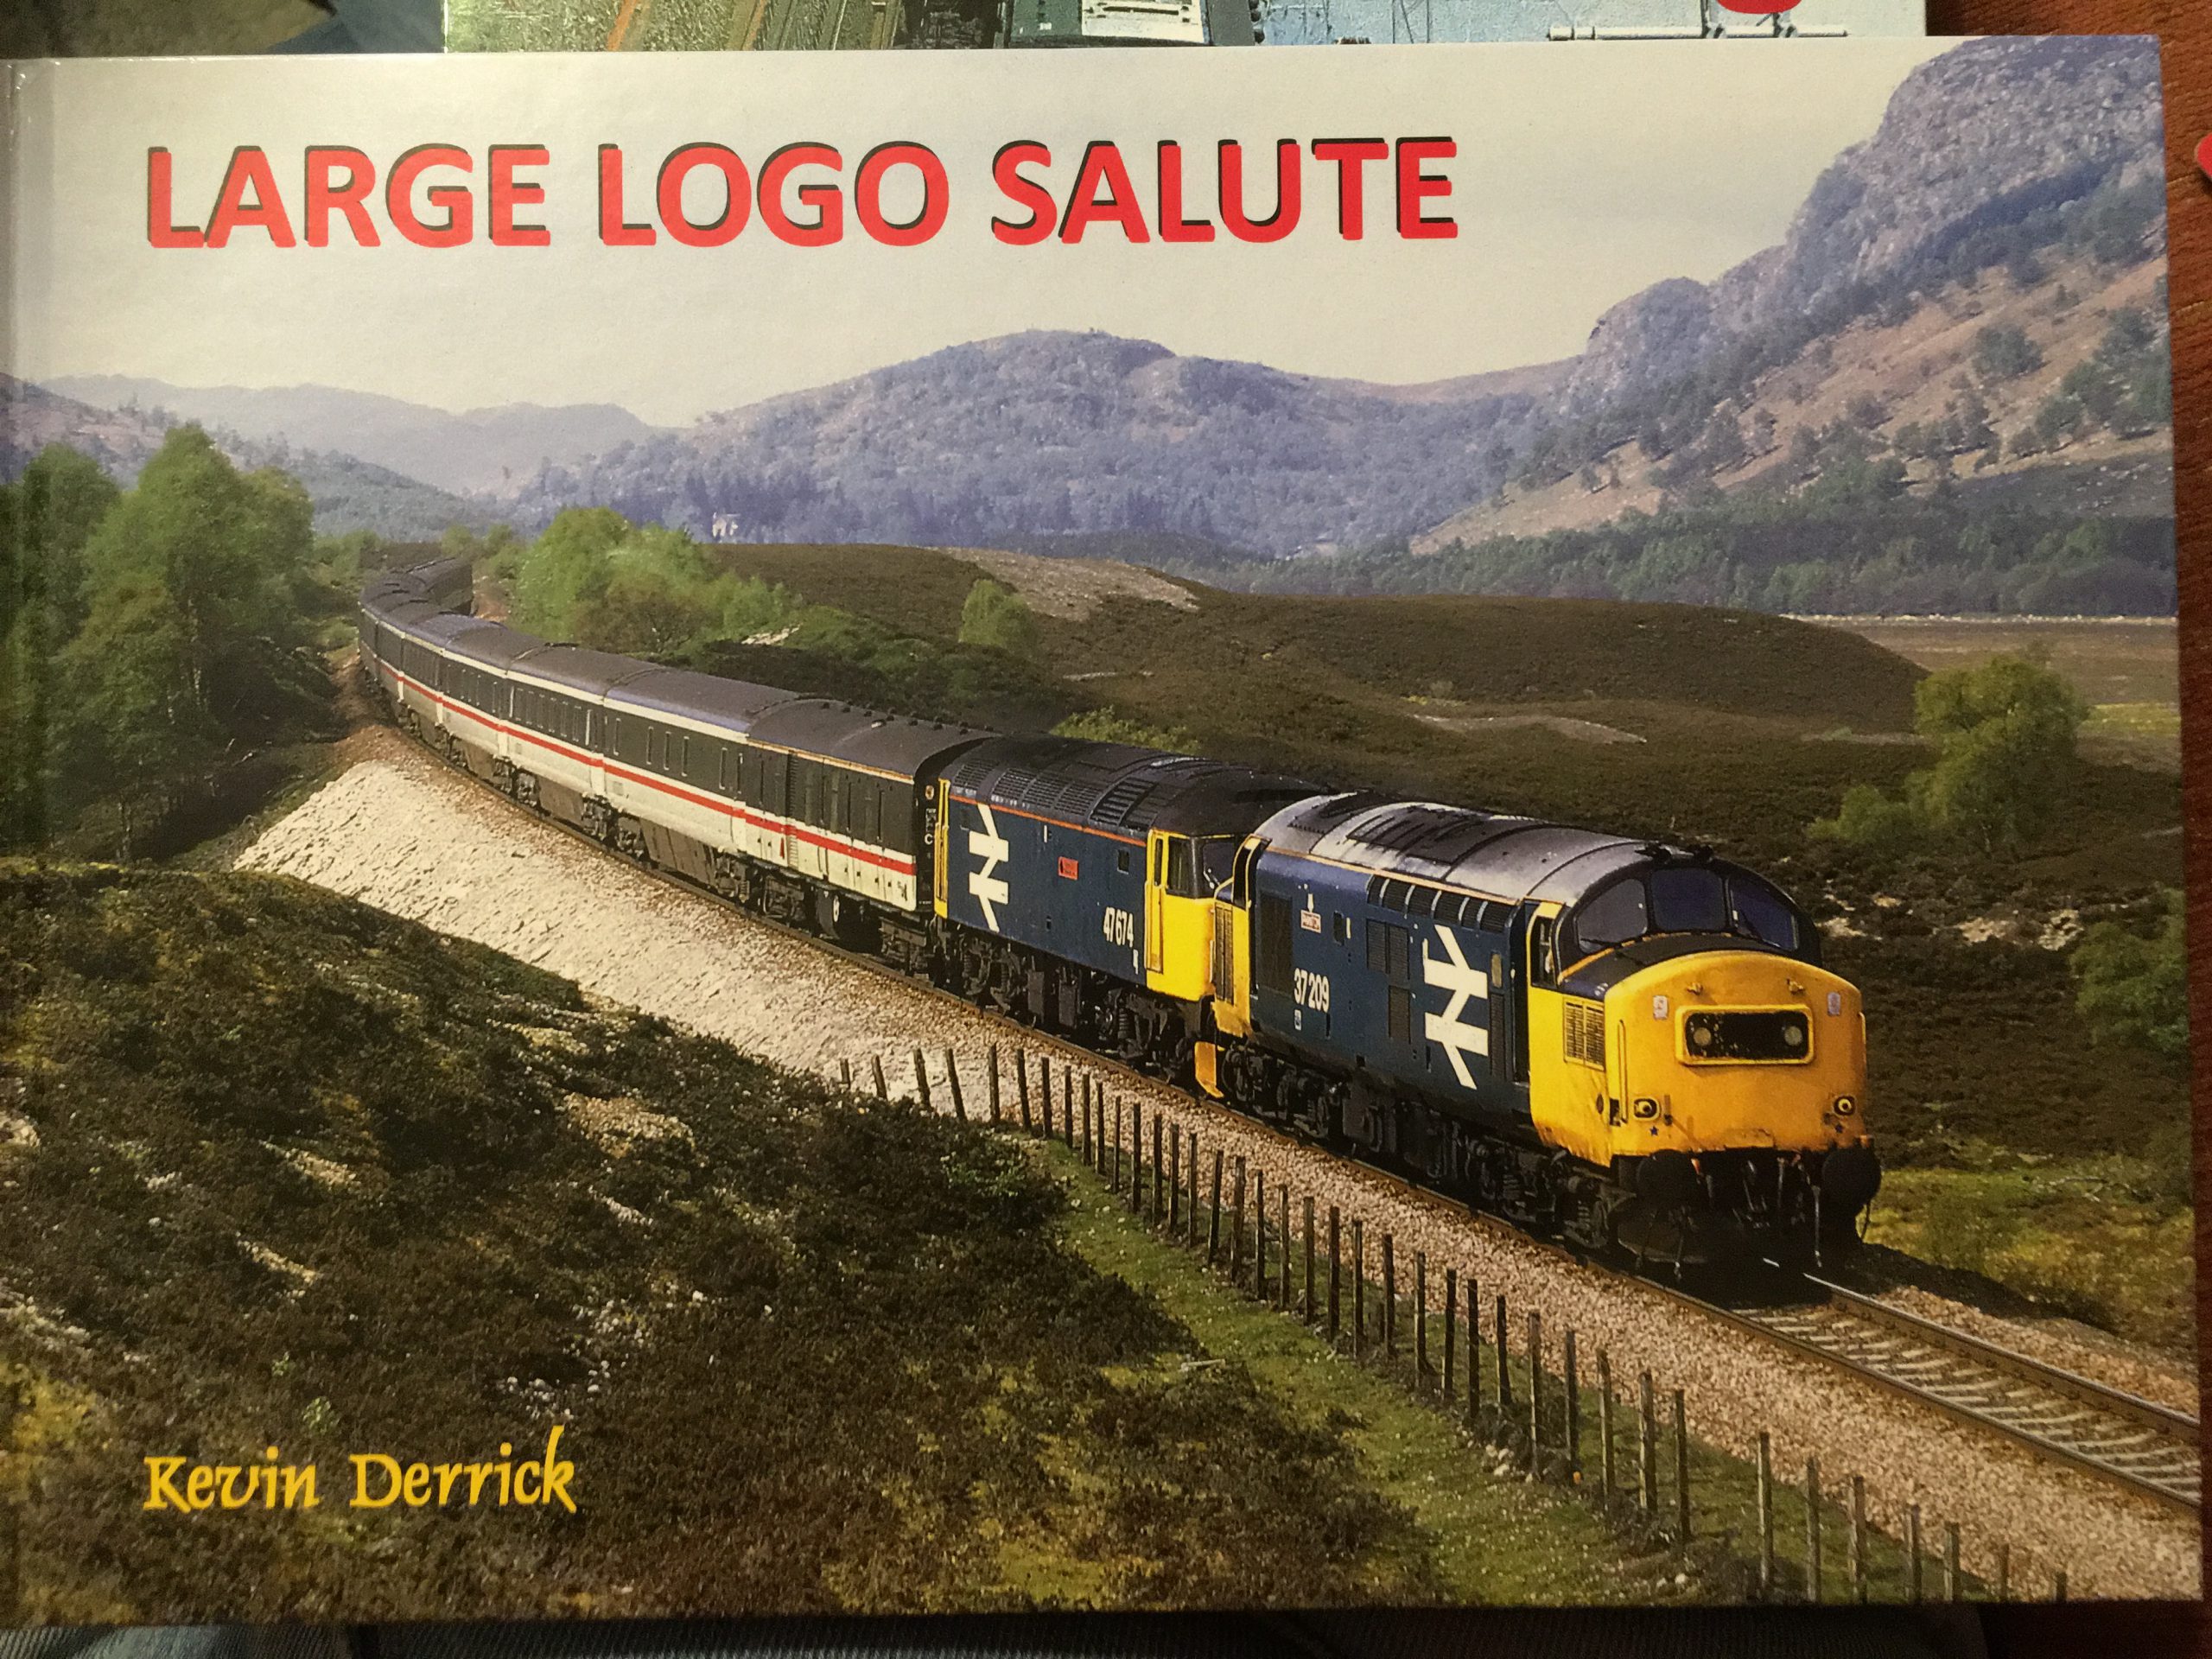 SUPPORT THE CLASS 56 GROUP AND GRAB A BARGAIN BOOK